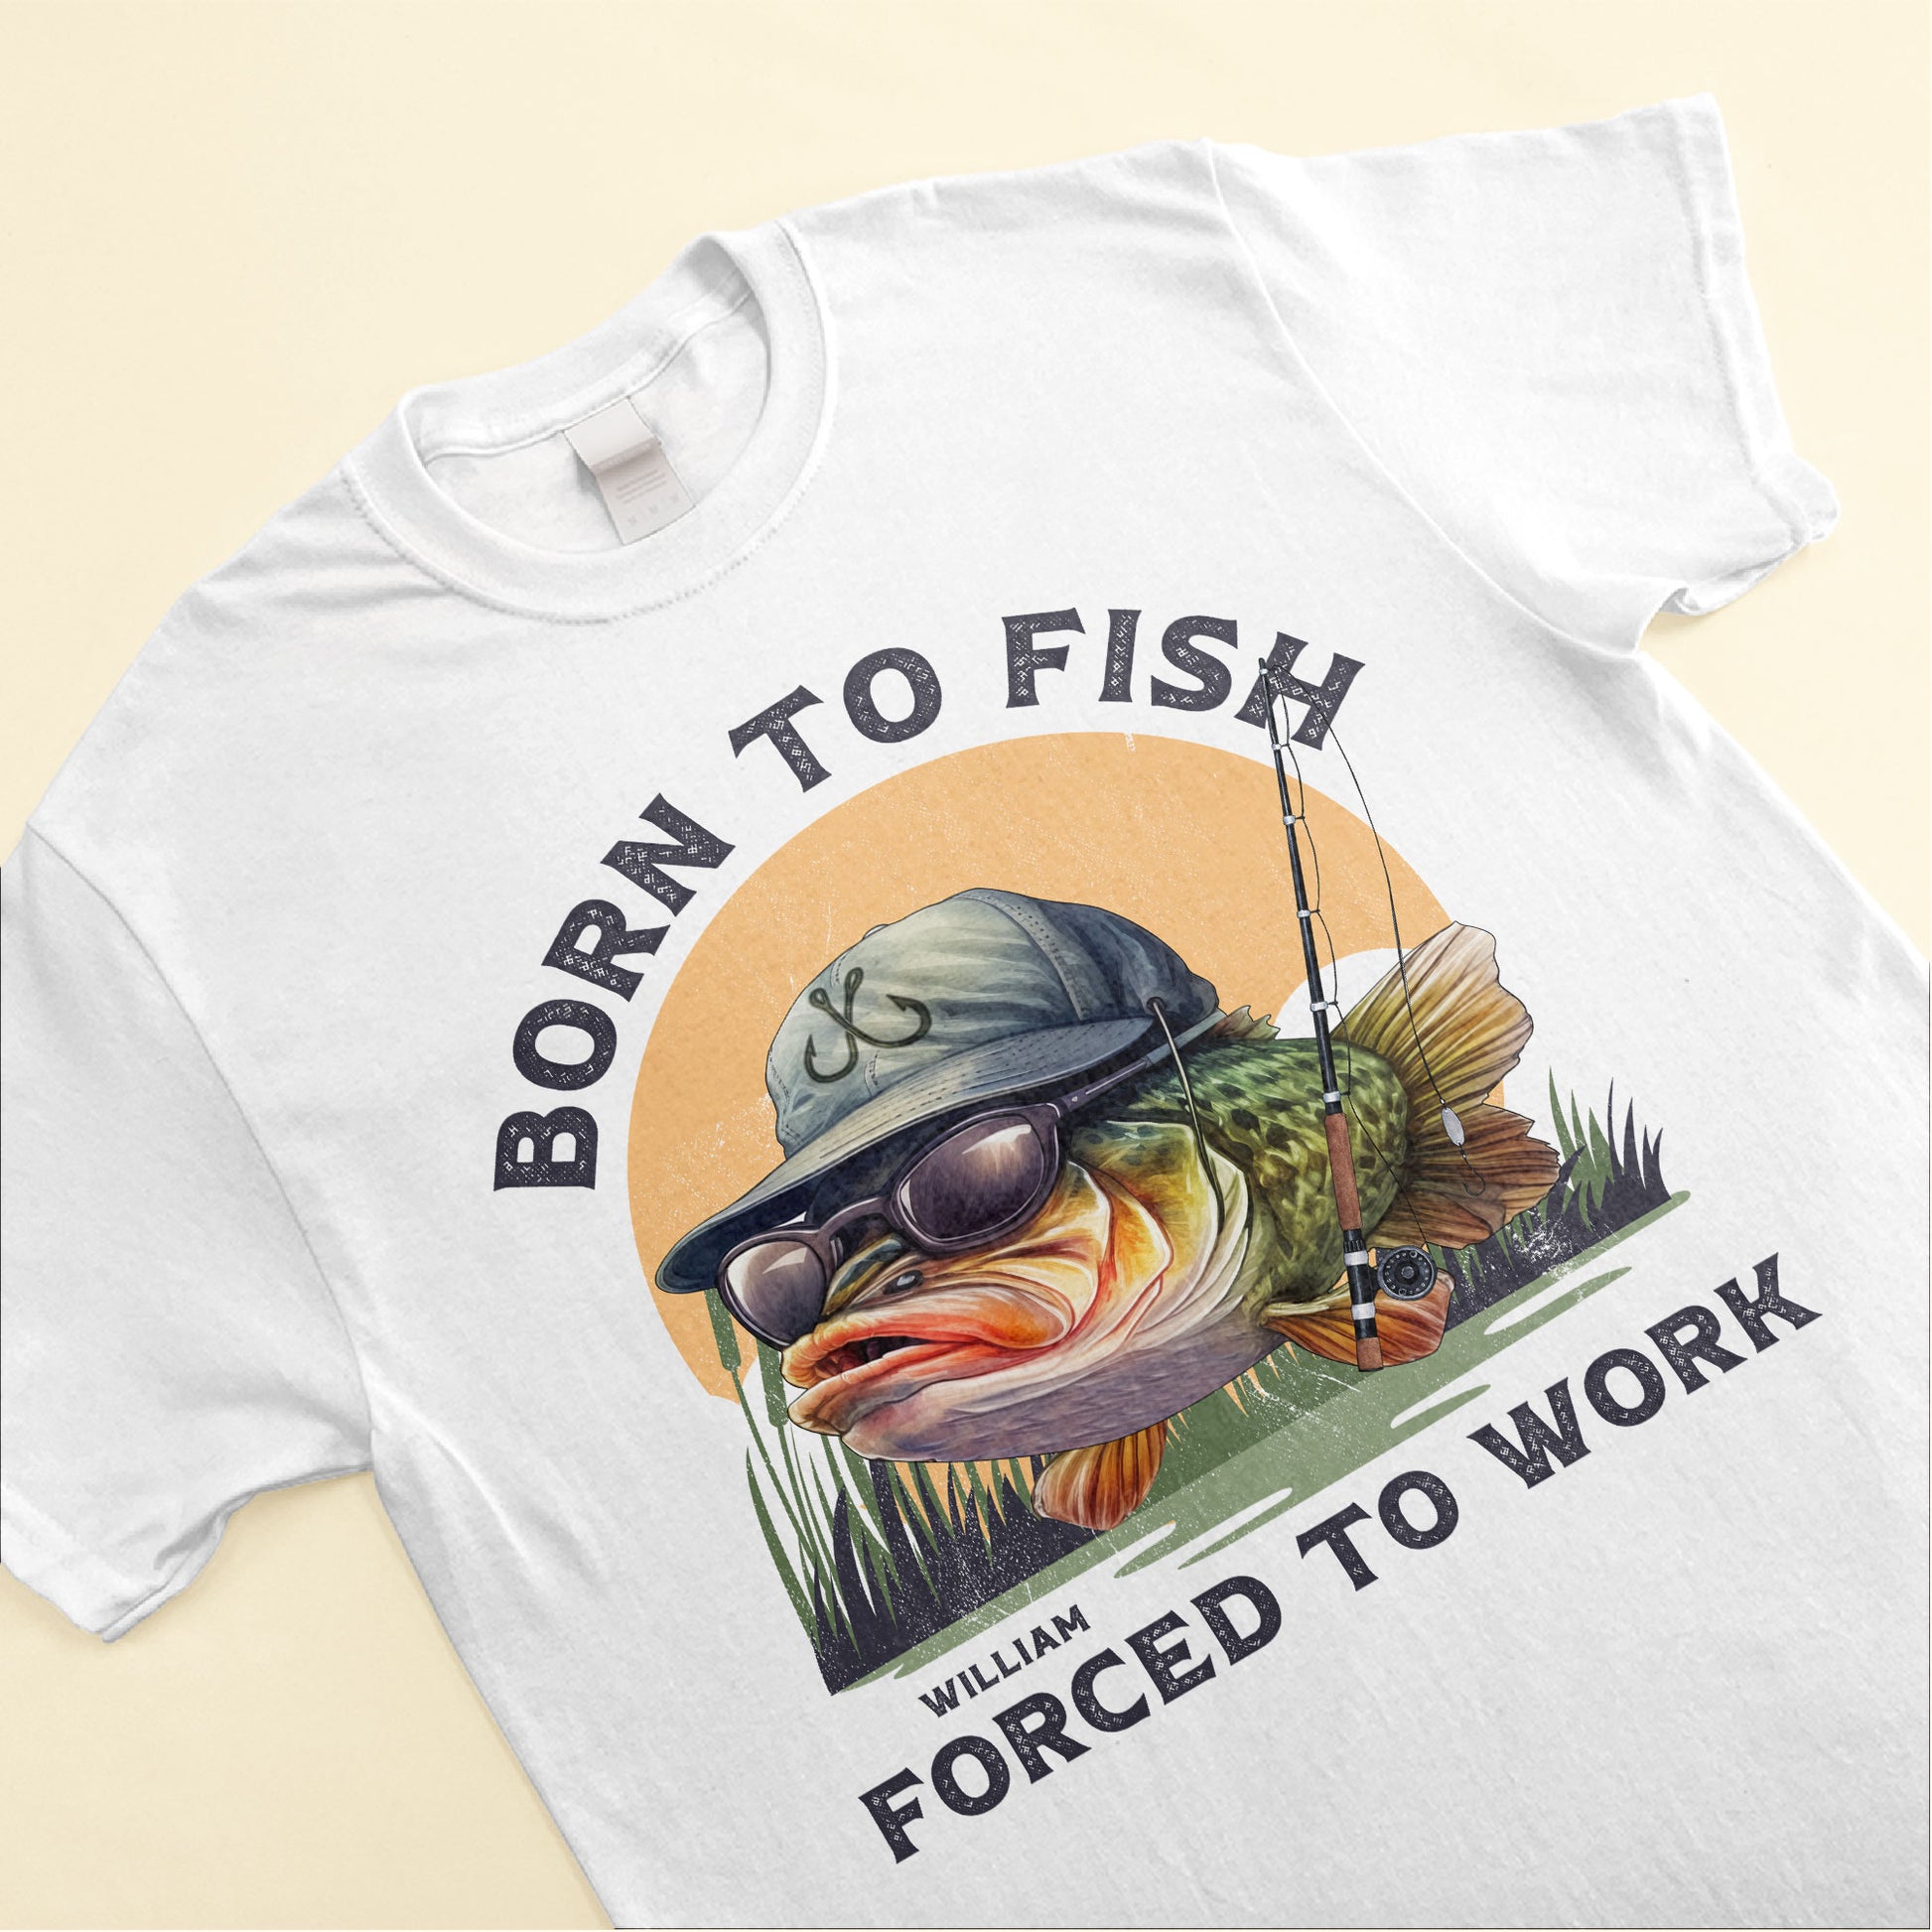 Born To Fish Forced To Go To Work Vintage Bass Fishing Gear Shirt